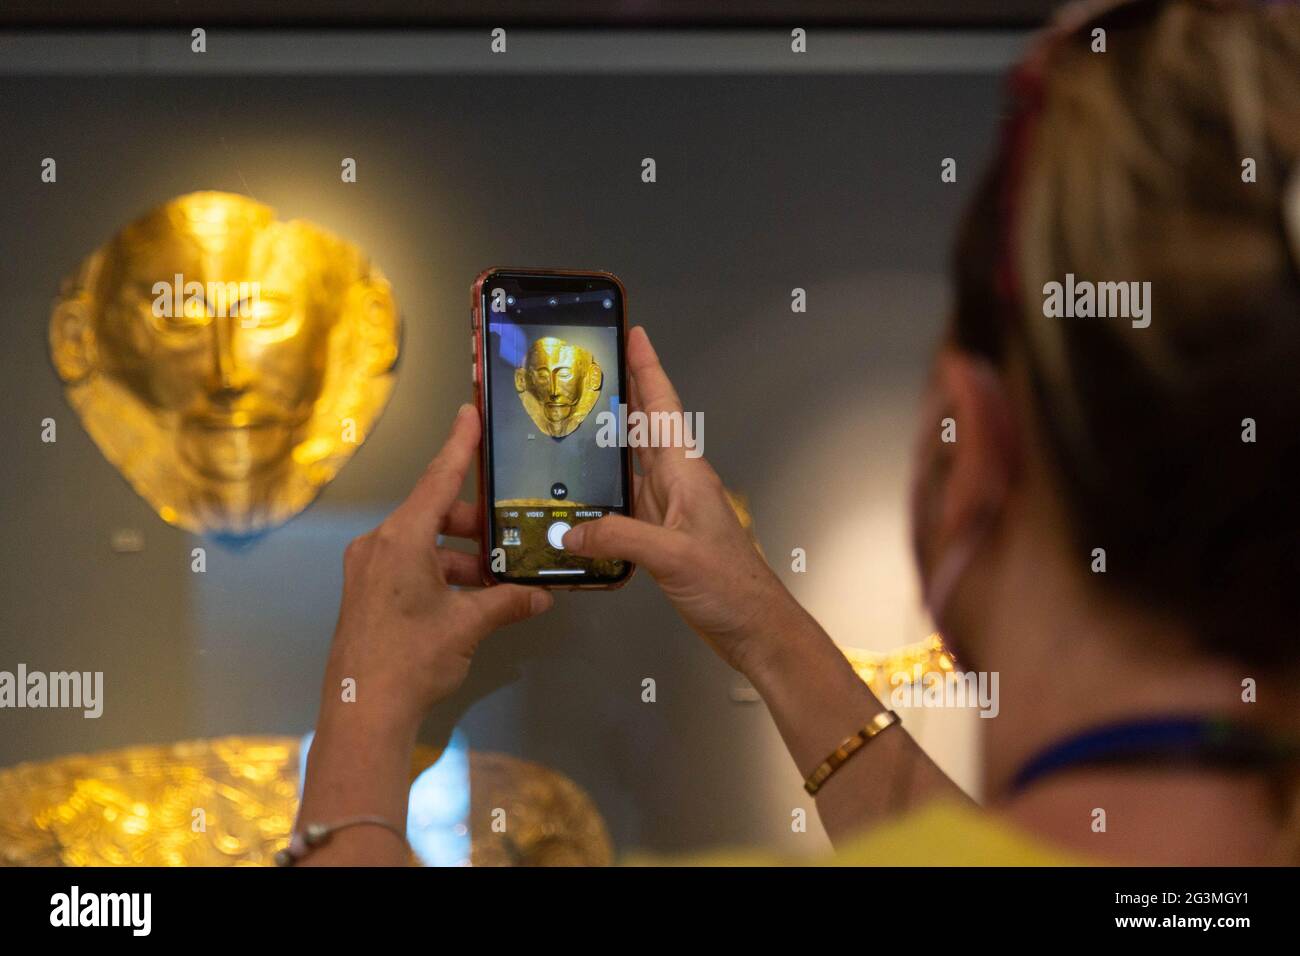 Athens, Greece. 7th June, 2021. A visiter takes pictures of exhibits at the National Archaeological Museum in Athens, Greece, June 7, 2021. The imposing golden mask of Agamemnon welcomes visitors at the National Archaeological Museum here, standing out among other finds from the royal cemetery of the ancient city of Mycenae on the Peloponnese peninsula dating back to the 16th century BC. TO GO WITH 'Interview: Ancient Greek golden death-masks of Mycenae still engulfed in mystery, says archaeologist' Credit: Marios Lolos/Xinhua/Alamy Live News Stock Photo